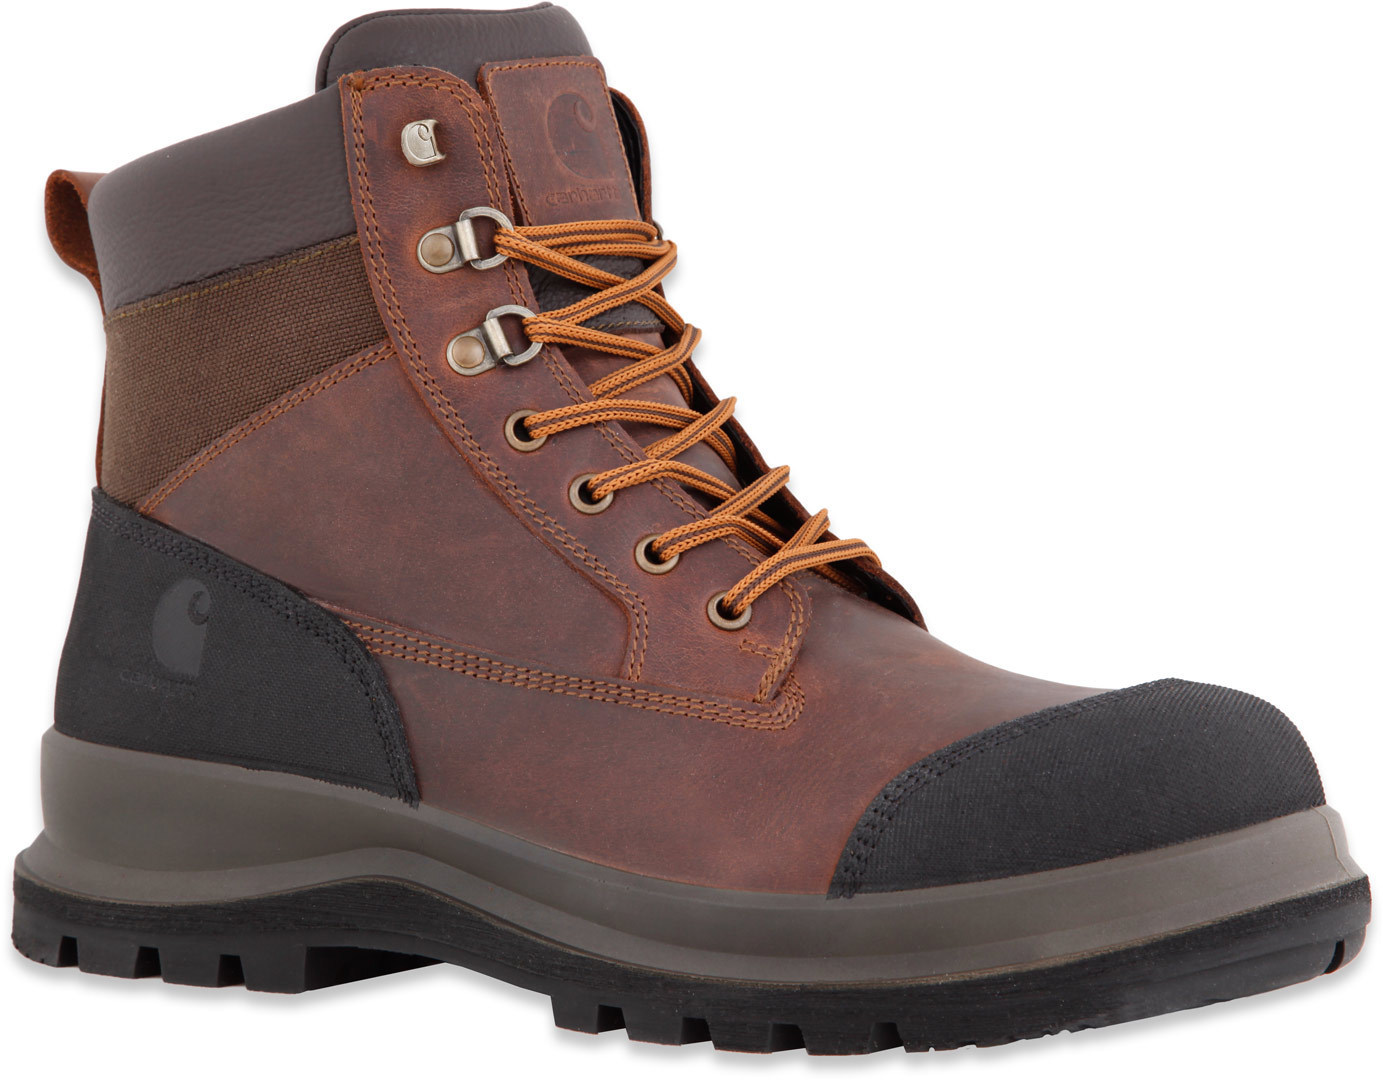 Carhartt Detroit Rugged Flex S3 Mid Boots, brown, Size 40, brown, Size 40